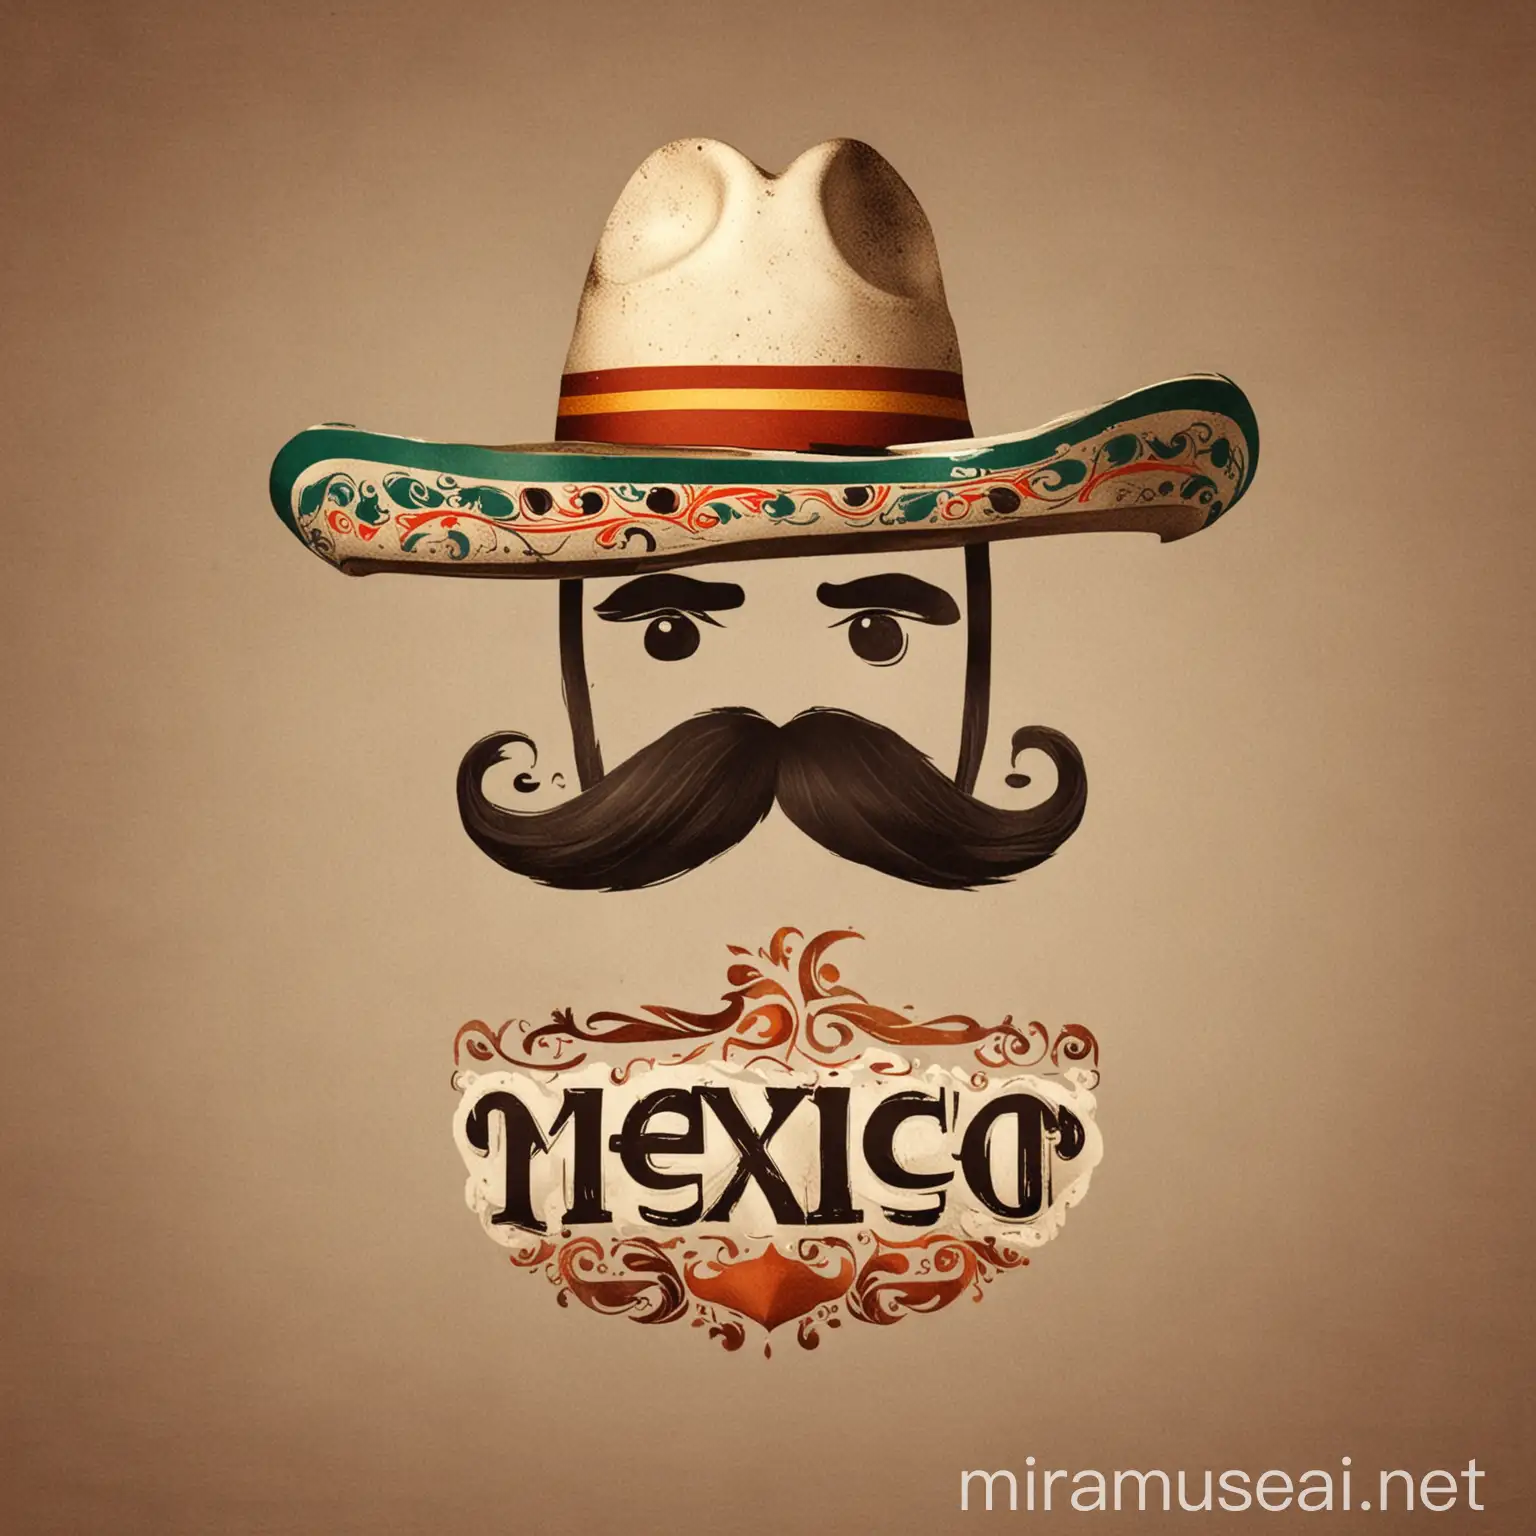 Mexican Hat and Mustache Logo Representing Mexican Stereotypes with Gestalt Theory